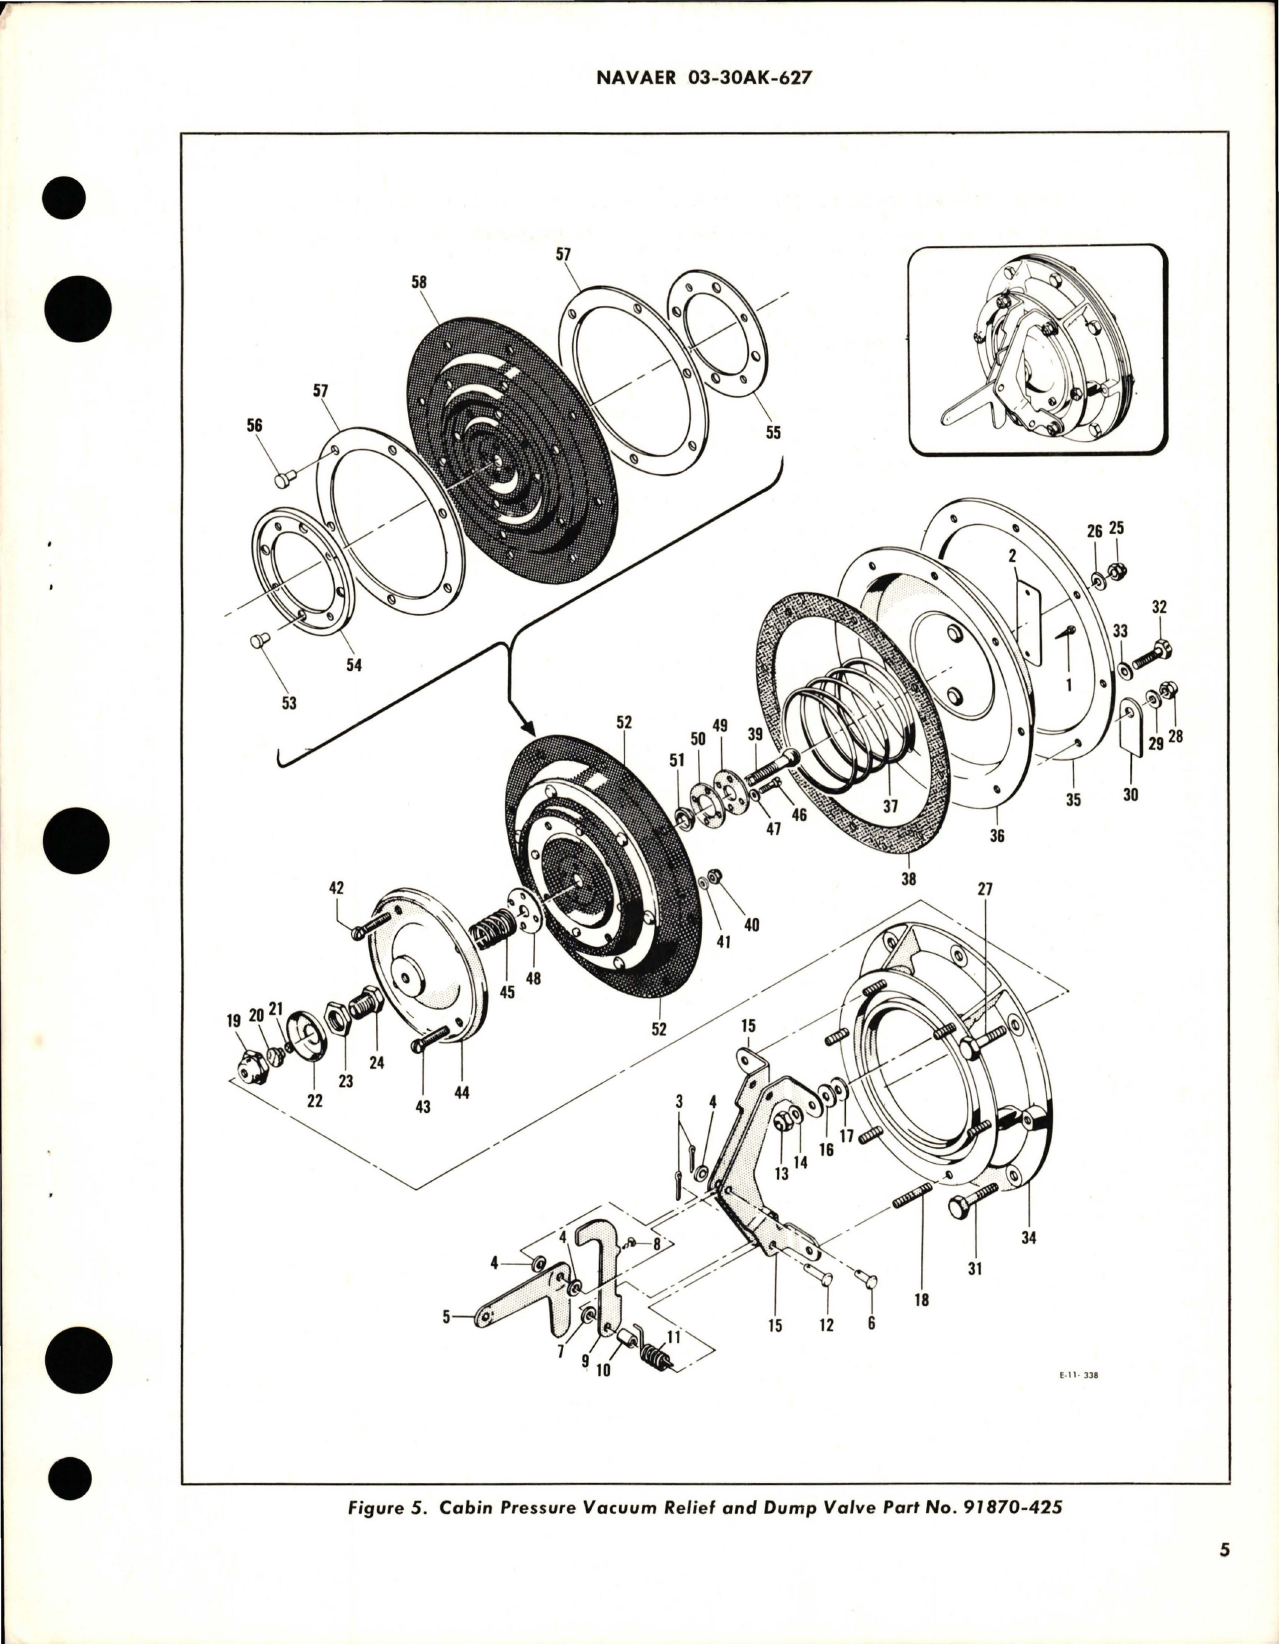 Sample page 5 from AirCorps Library document: Overhaul Instructions with Parts Breakdown for Cabin Pressure Vacuum Relief and Dump Valve - Part 91870-425 - Model CSV3-1-1